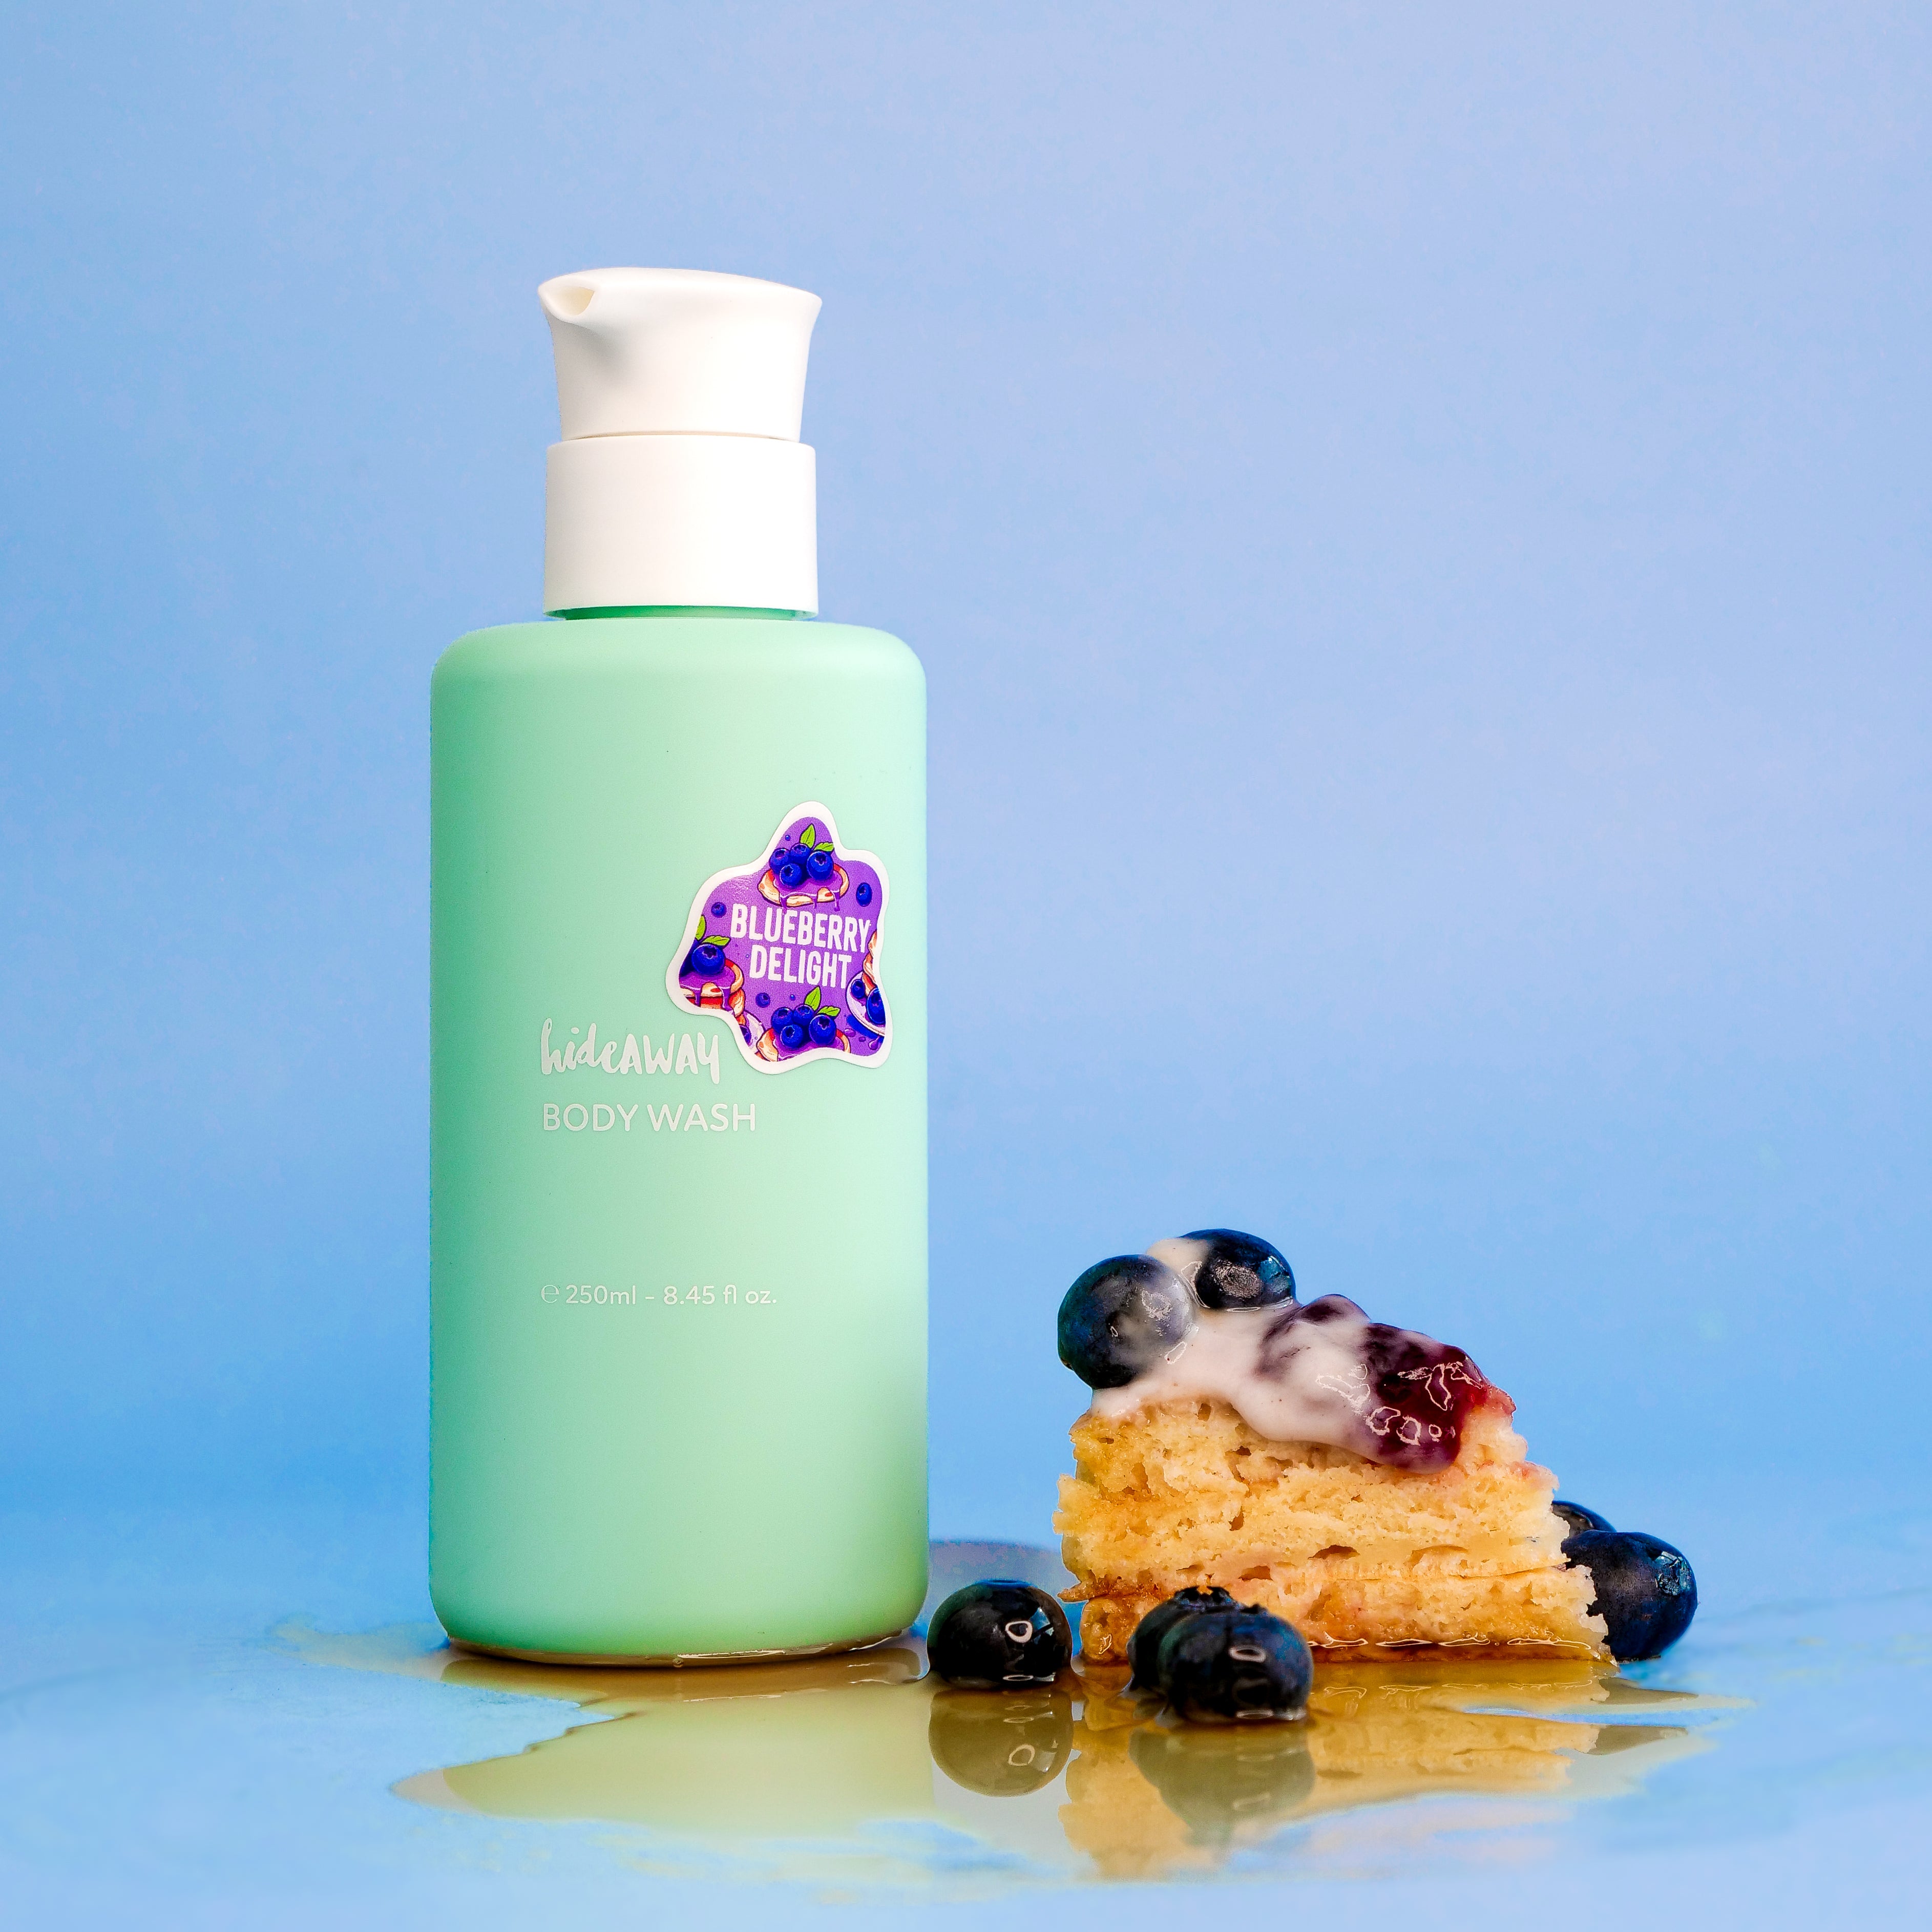 Blueberry Delight Body Wash